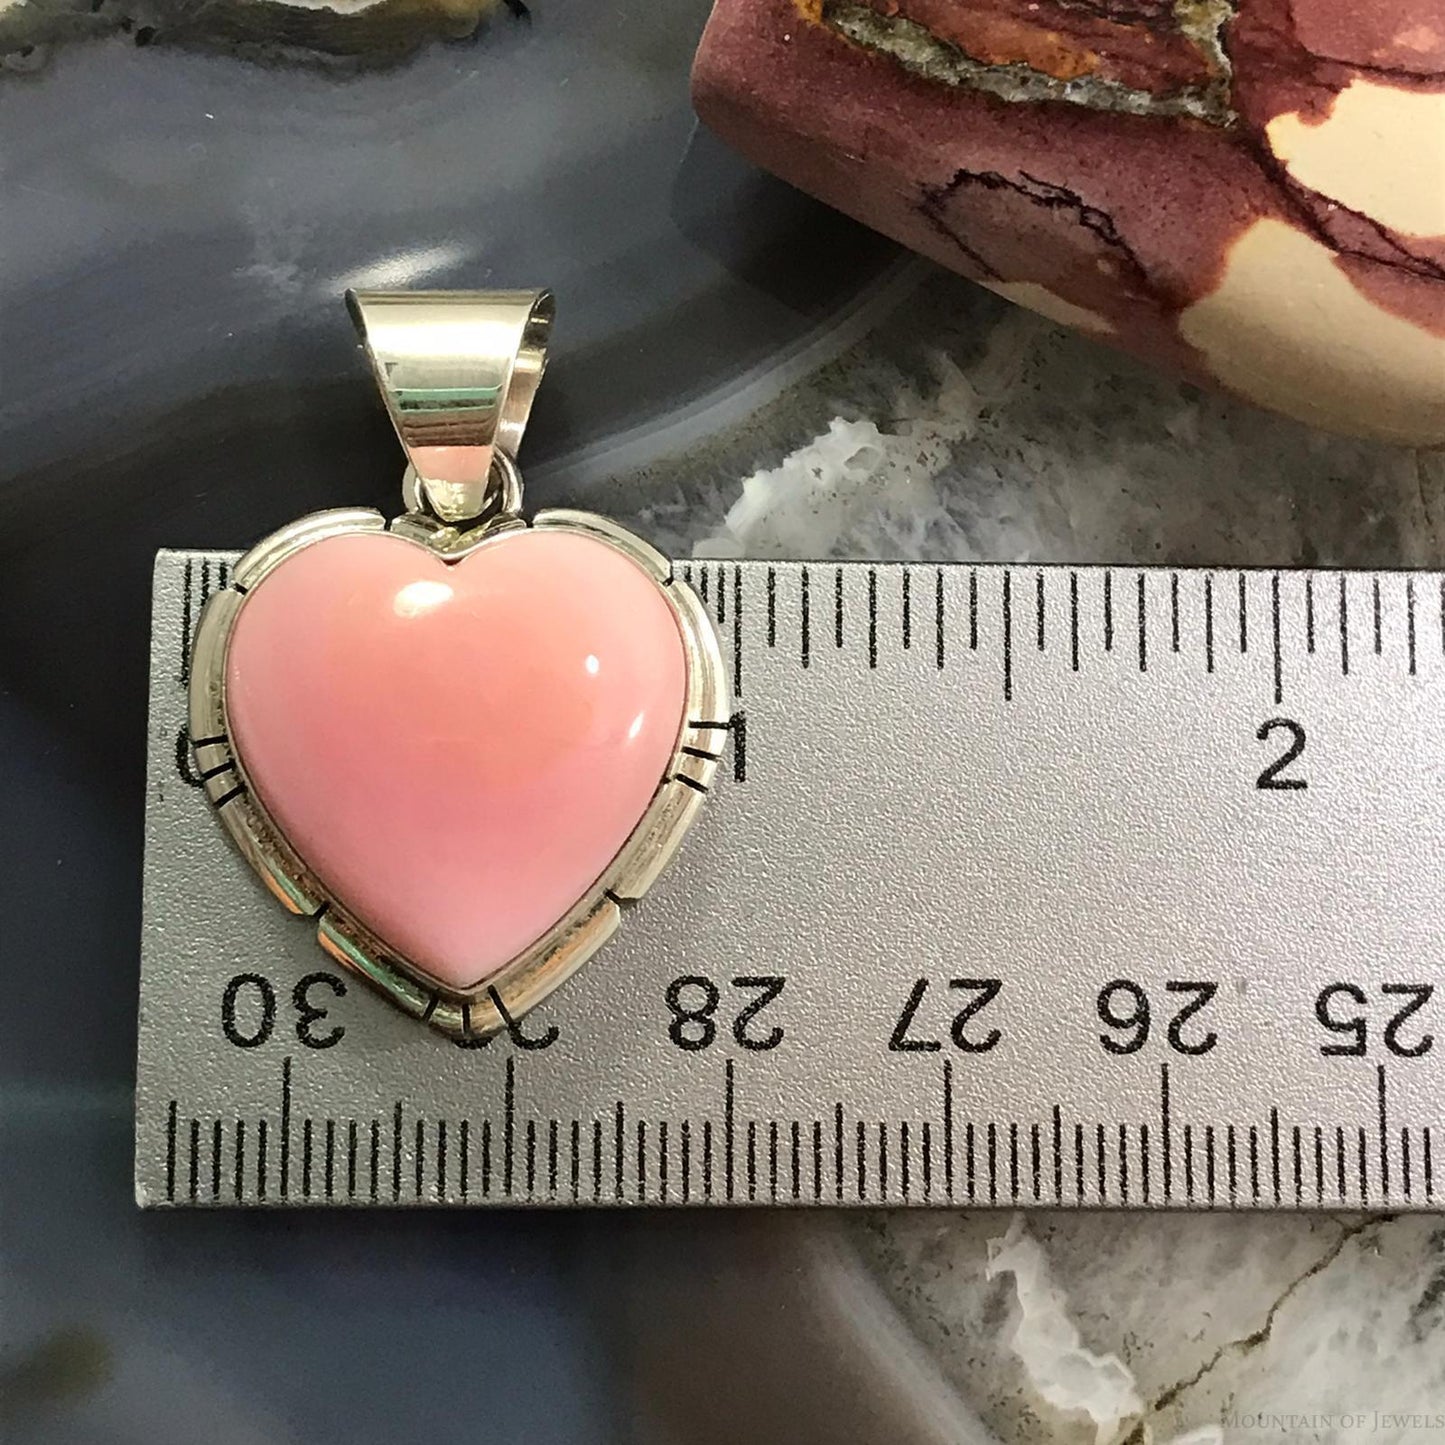 Samson Edsitty Native American Sterling Silver Pink Conch Heart Pendant For Women